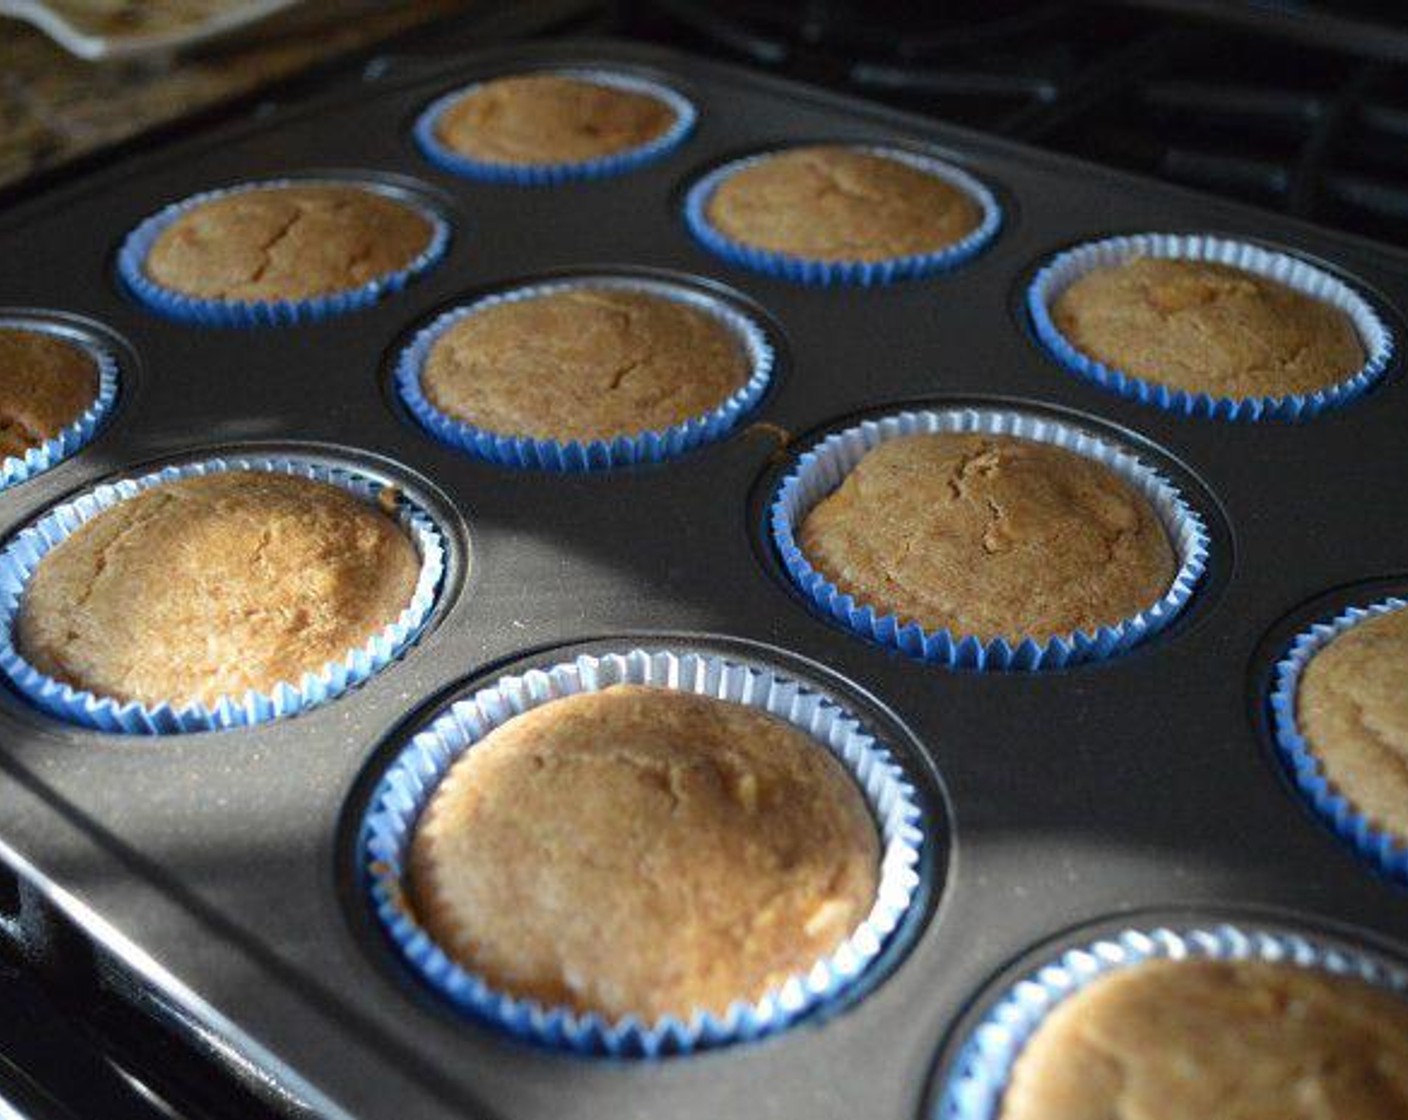 step 4 Use a 1/4 cup measure to scoop the batter into each lined muffin well. Get the muffin pans into the oven to bake for 20-25 minutes. Check that they are baked through with a toothpick. If inserted in the center of the muffin it should come out cleanly. Allow them to cool in the pan for a few minutes.